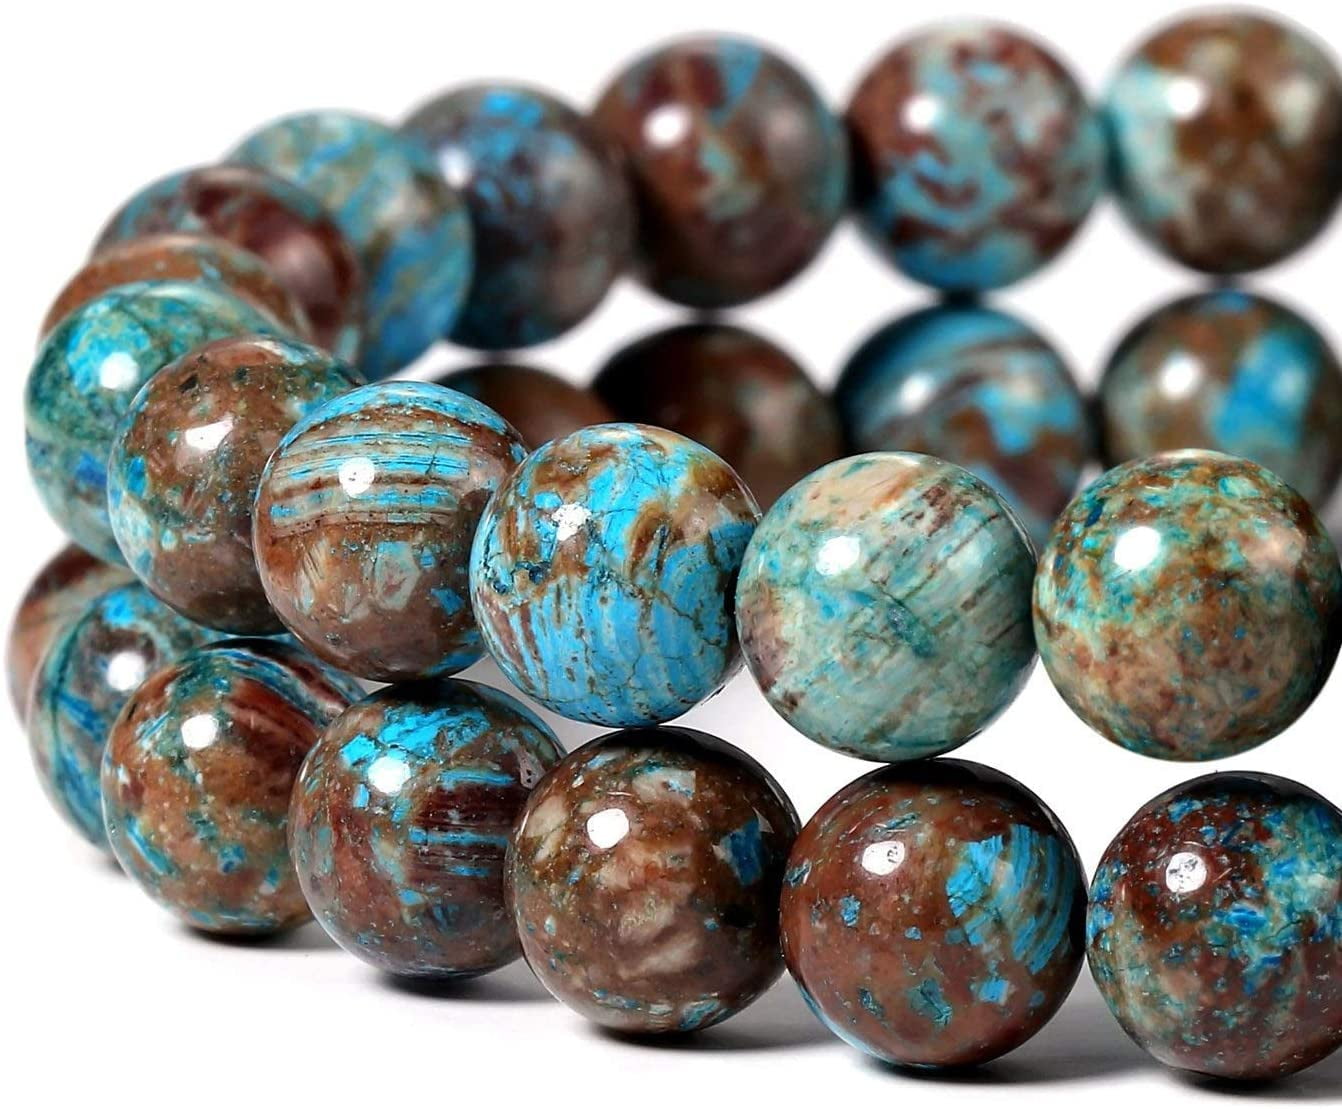 Wholesale Blue Lace Agate Beads Plain Round 8mm 10 Packs Of 5